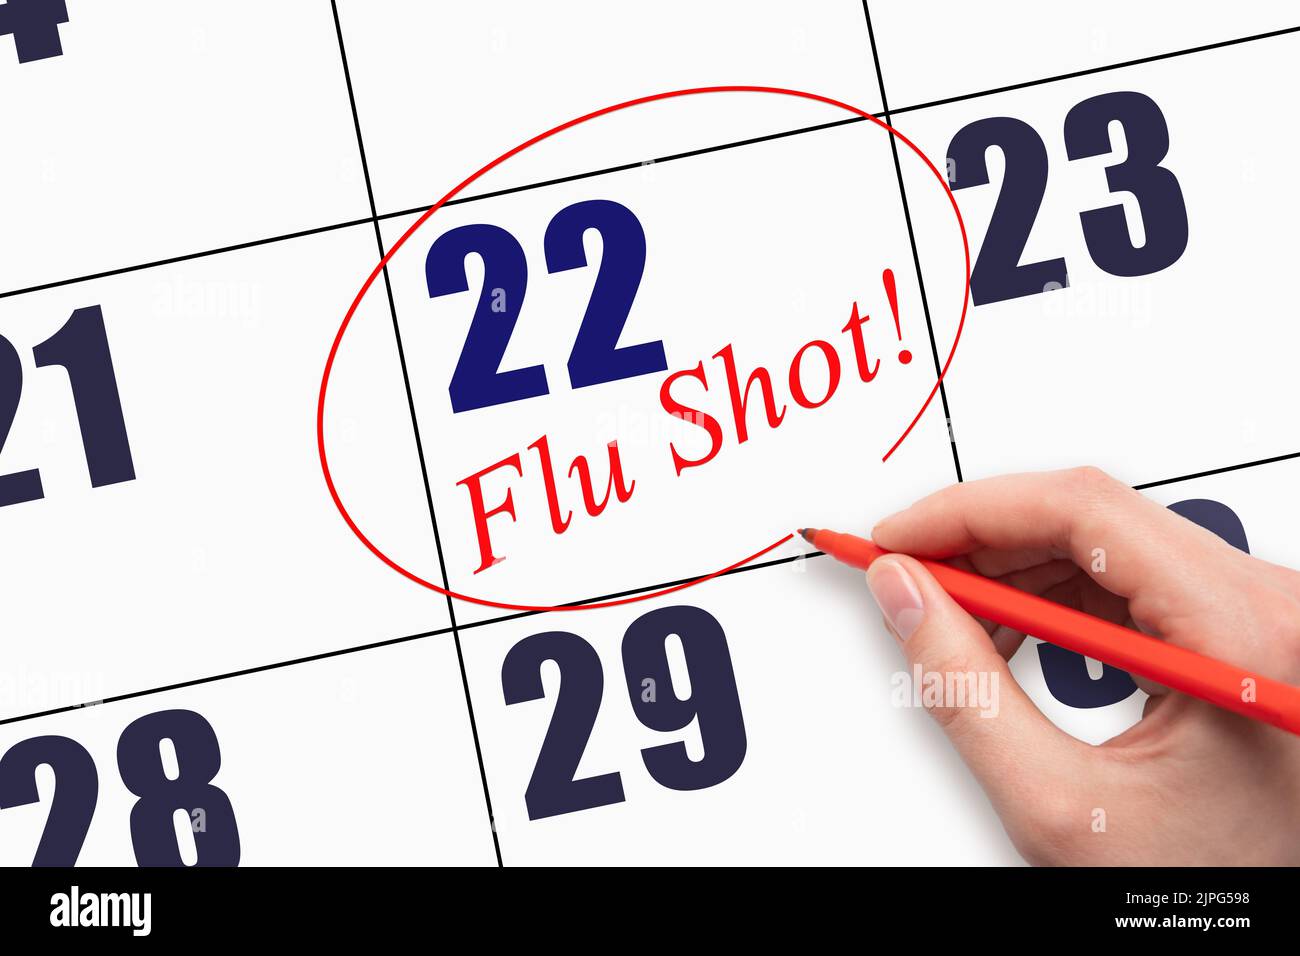 22nd day of the month.  Hand writing text FLU SHOT and circling the calendar date. Mark the date on the day planner to have a flu shot. Healthcare Med Stock Photo